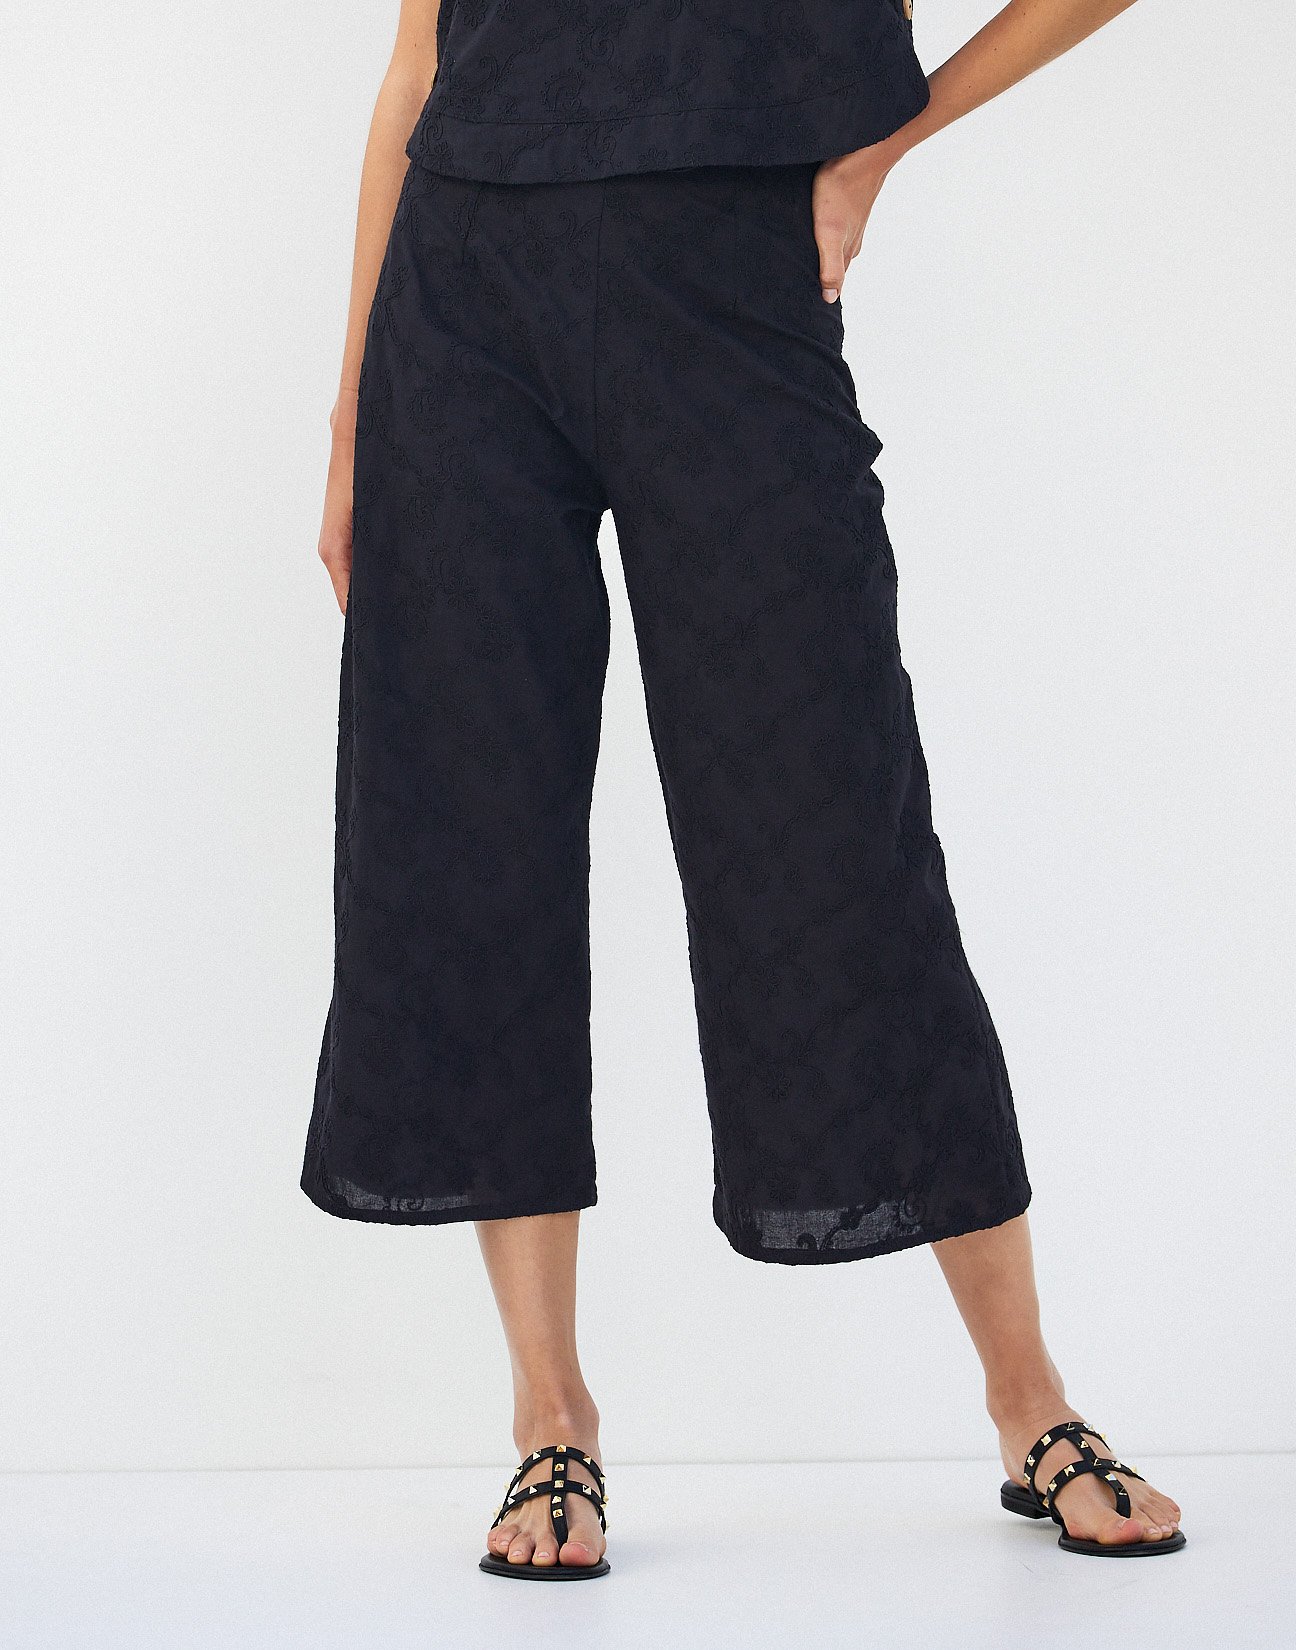 Embroidery culotte